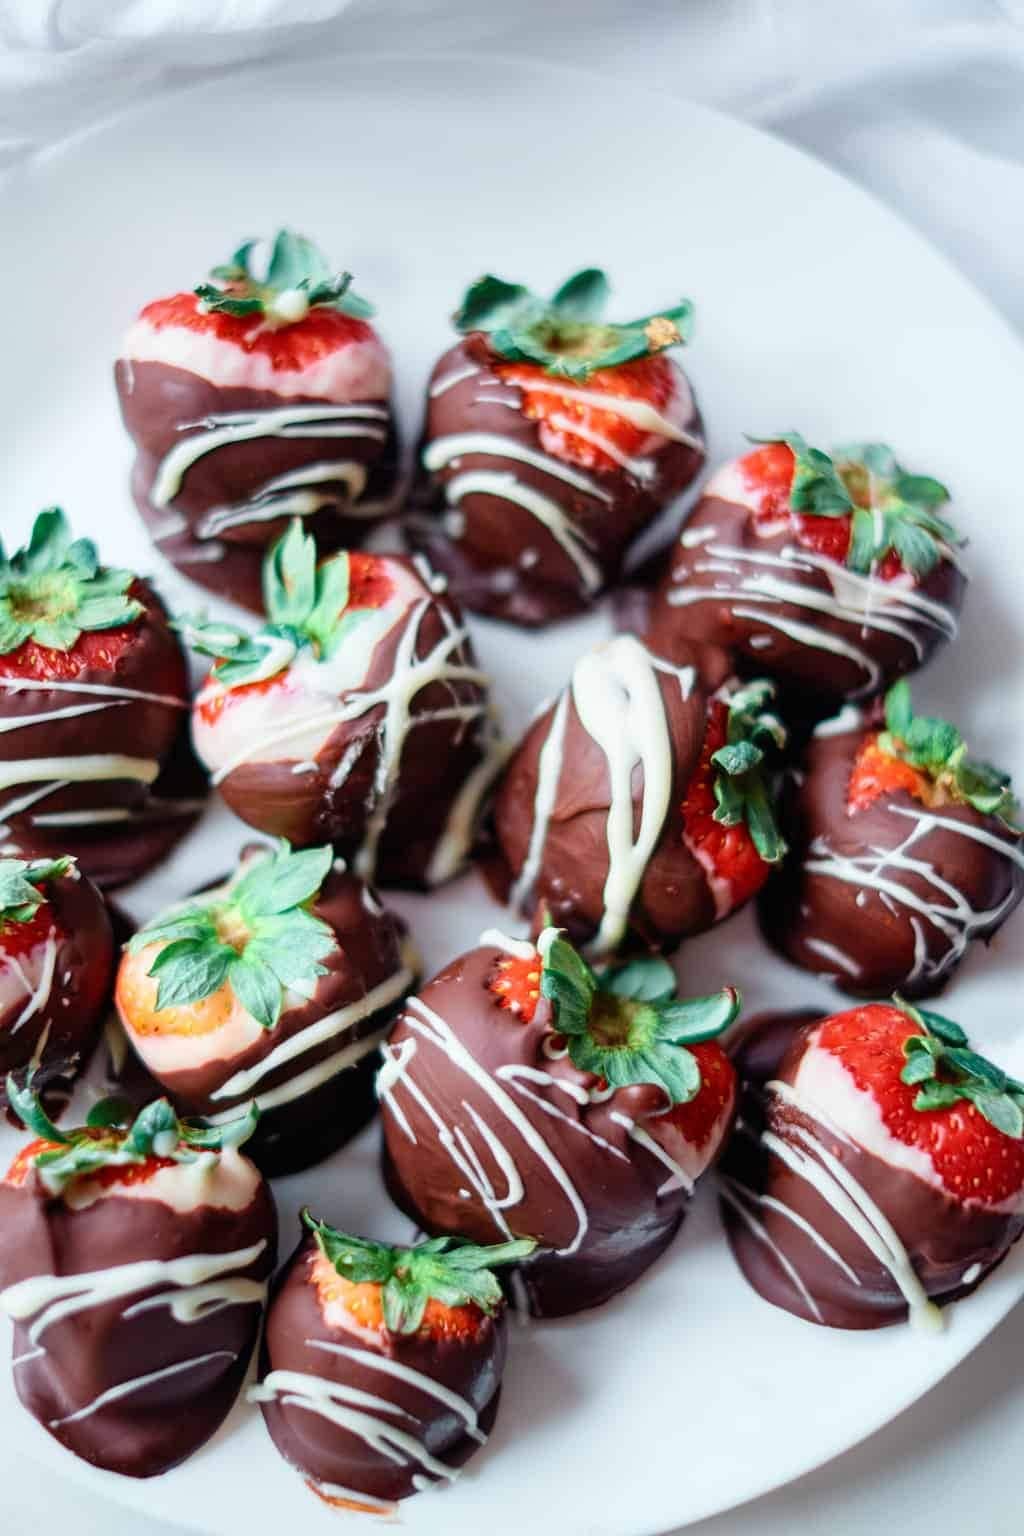 Plate with chocolate covered strawberries. 